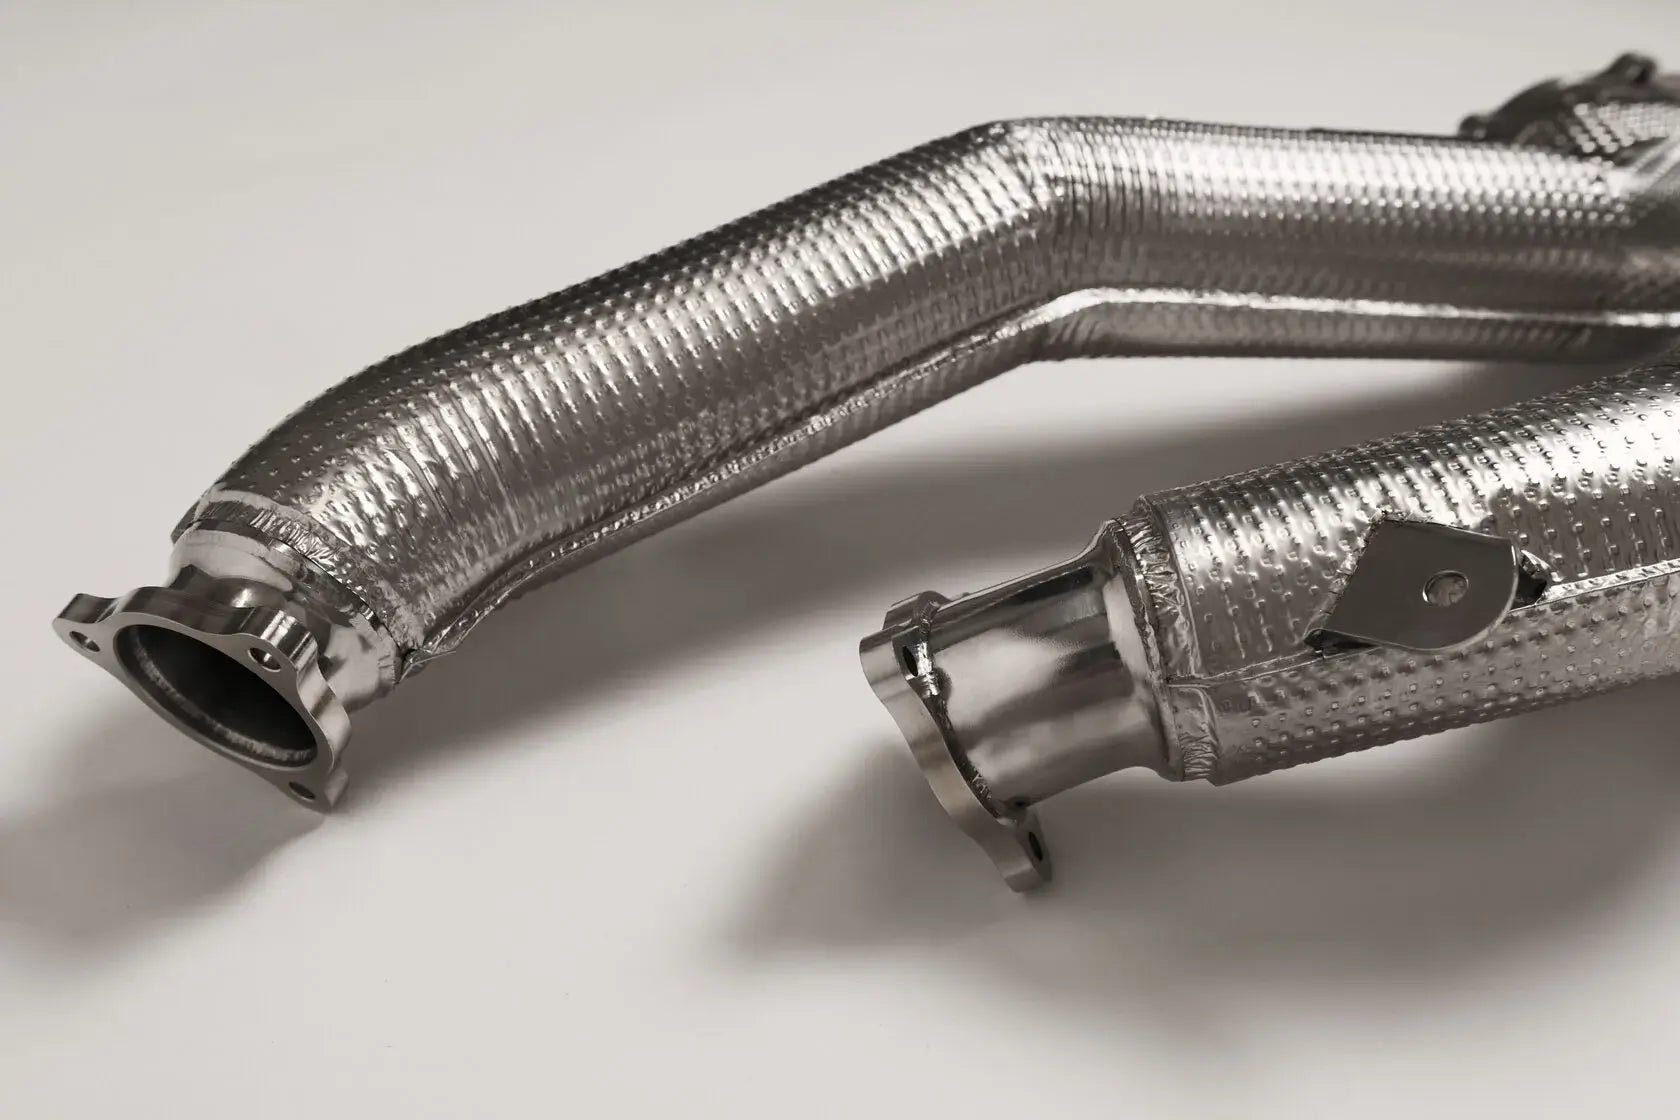 DEIKIN 10-AUDI.RS7.C7-DP Downpipe for AUDI RS7 (C7) without HeatShield Photo-4 